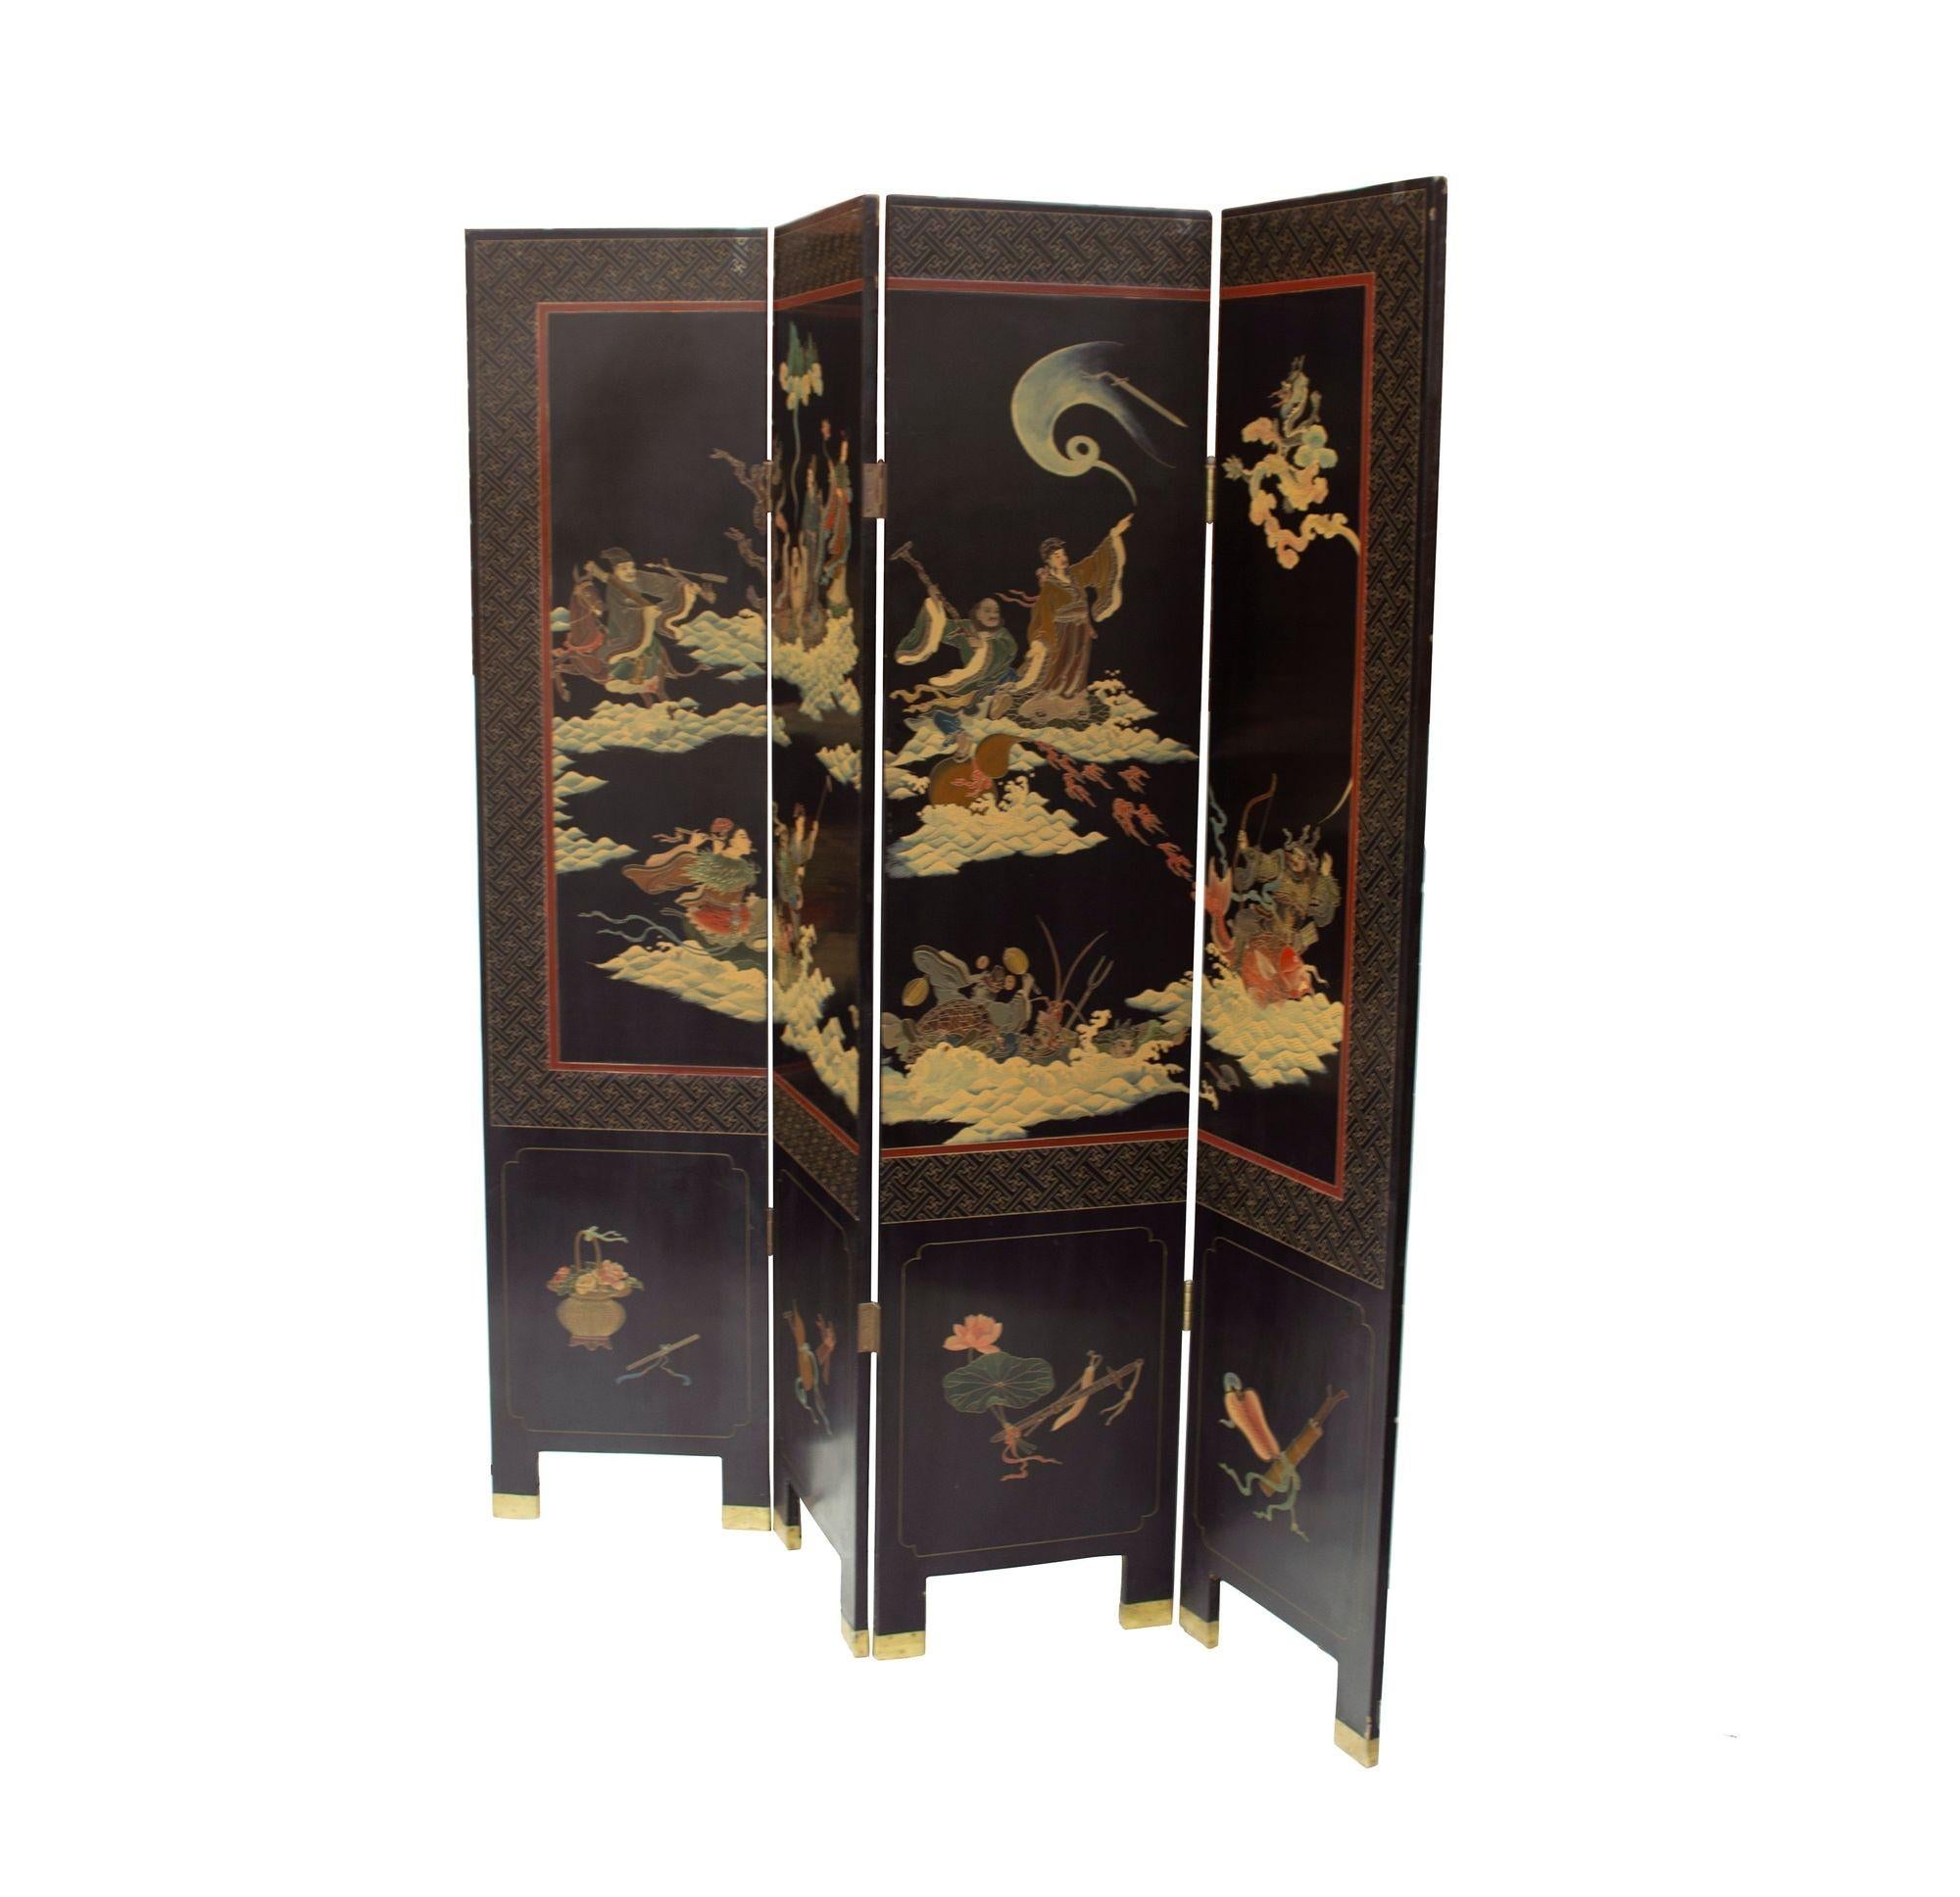 China, 1940s-1960s
Folding screen or room divider in black lacquer with hand painted decoration. Chic and functional chinoiserie piece. Each side of the screen has a different design- one side is florals, birds, and bamboo; the other has a detailed